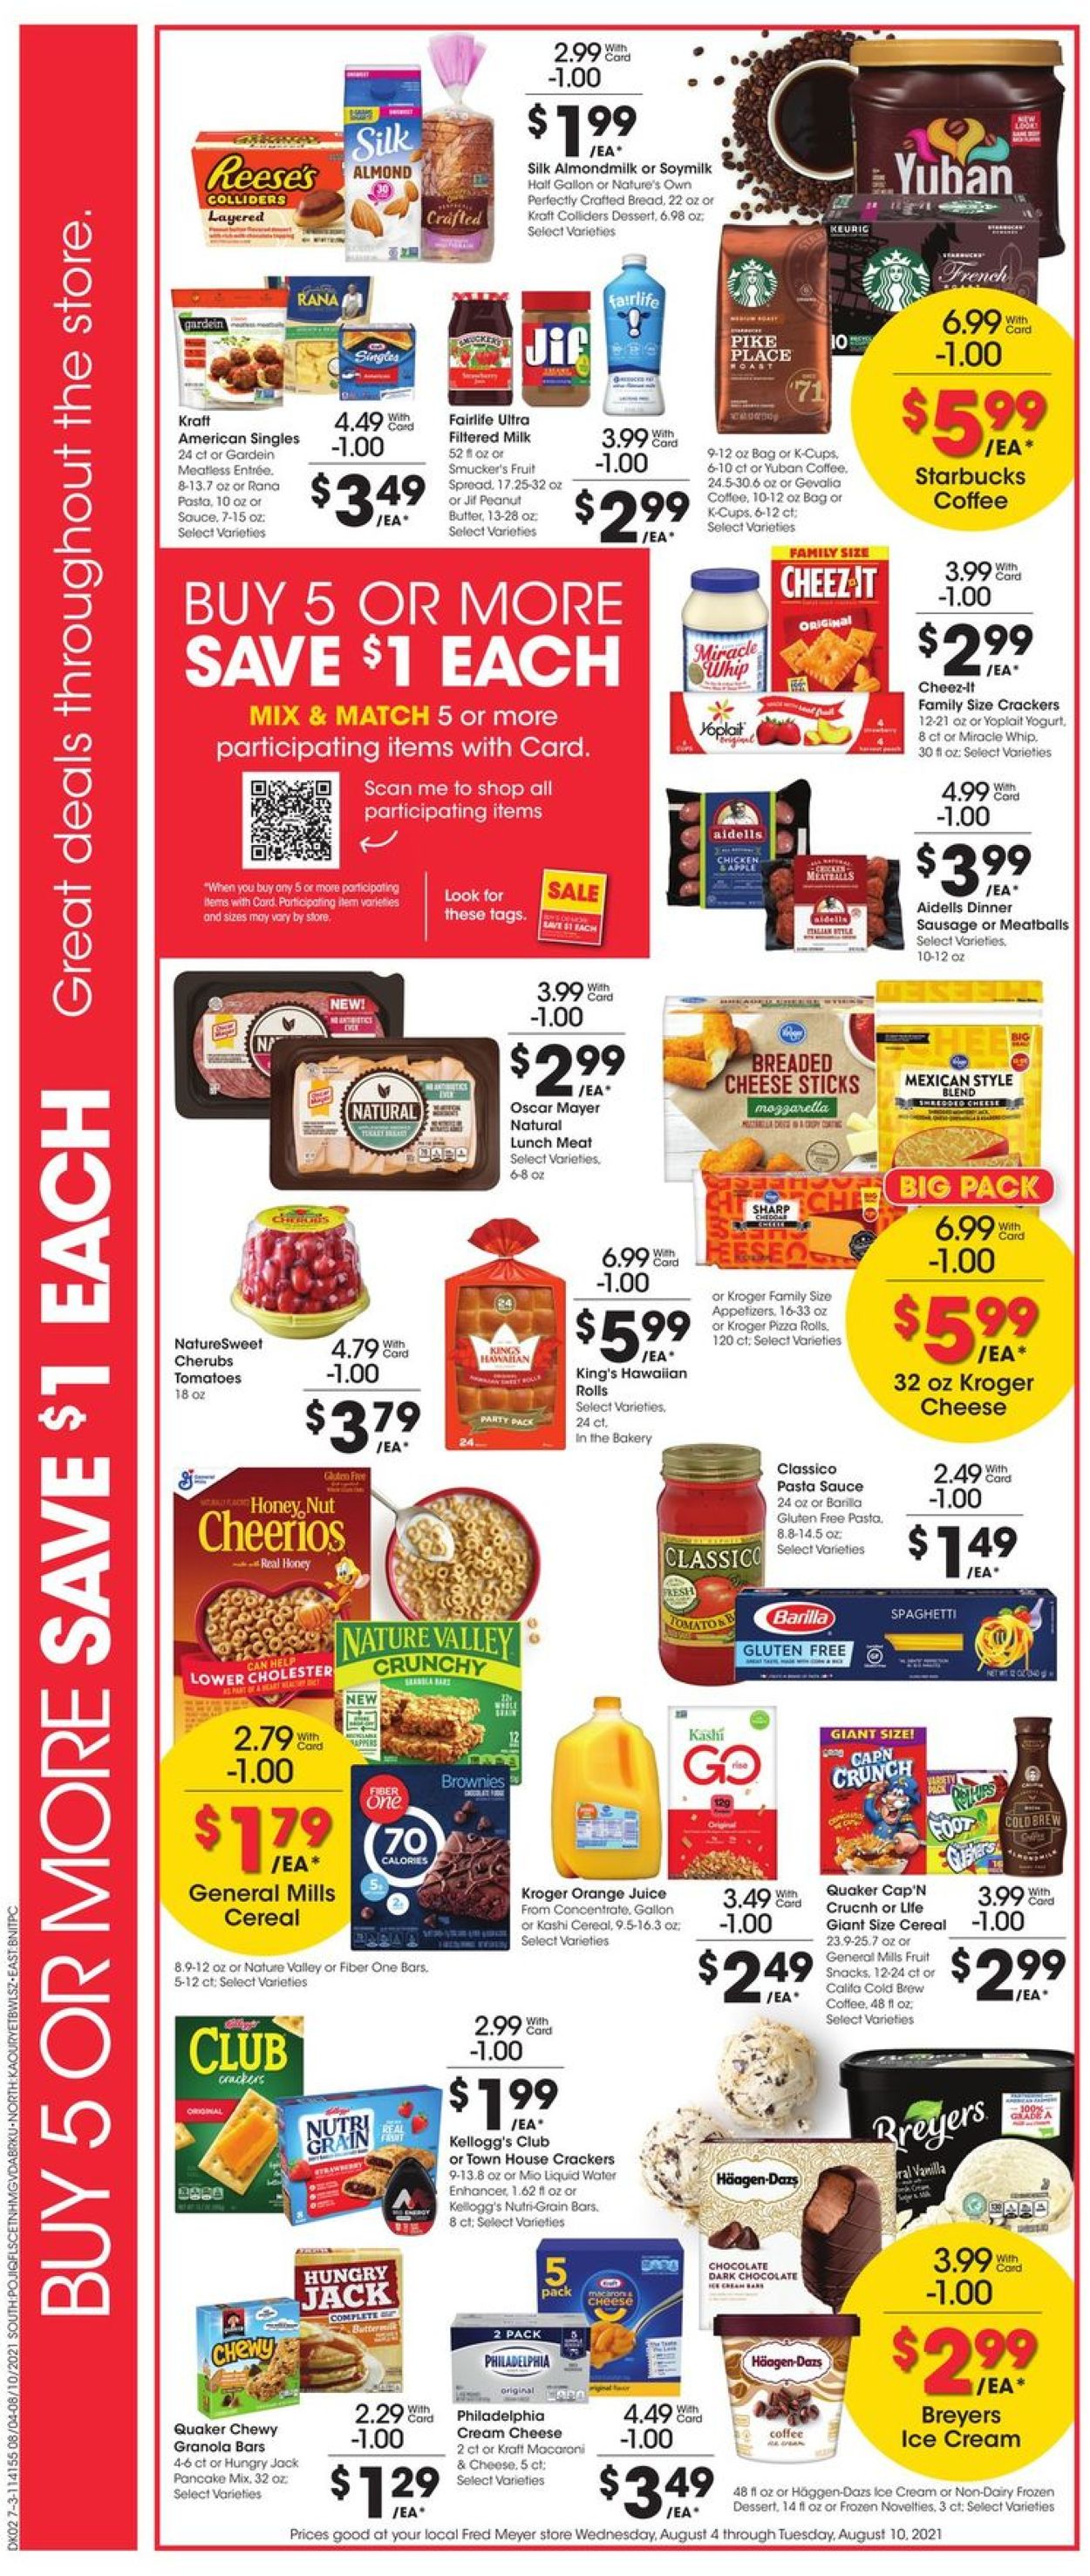 Fred Meyer Ad from 08/04/2021